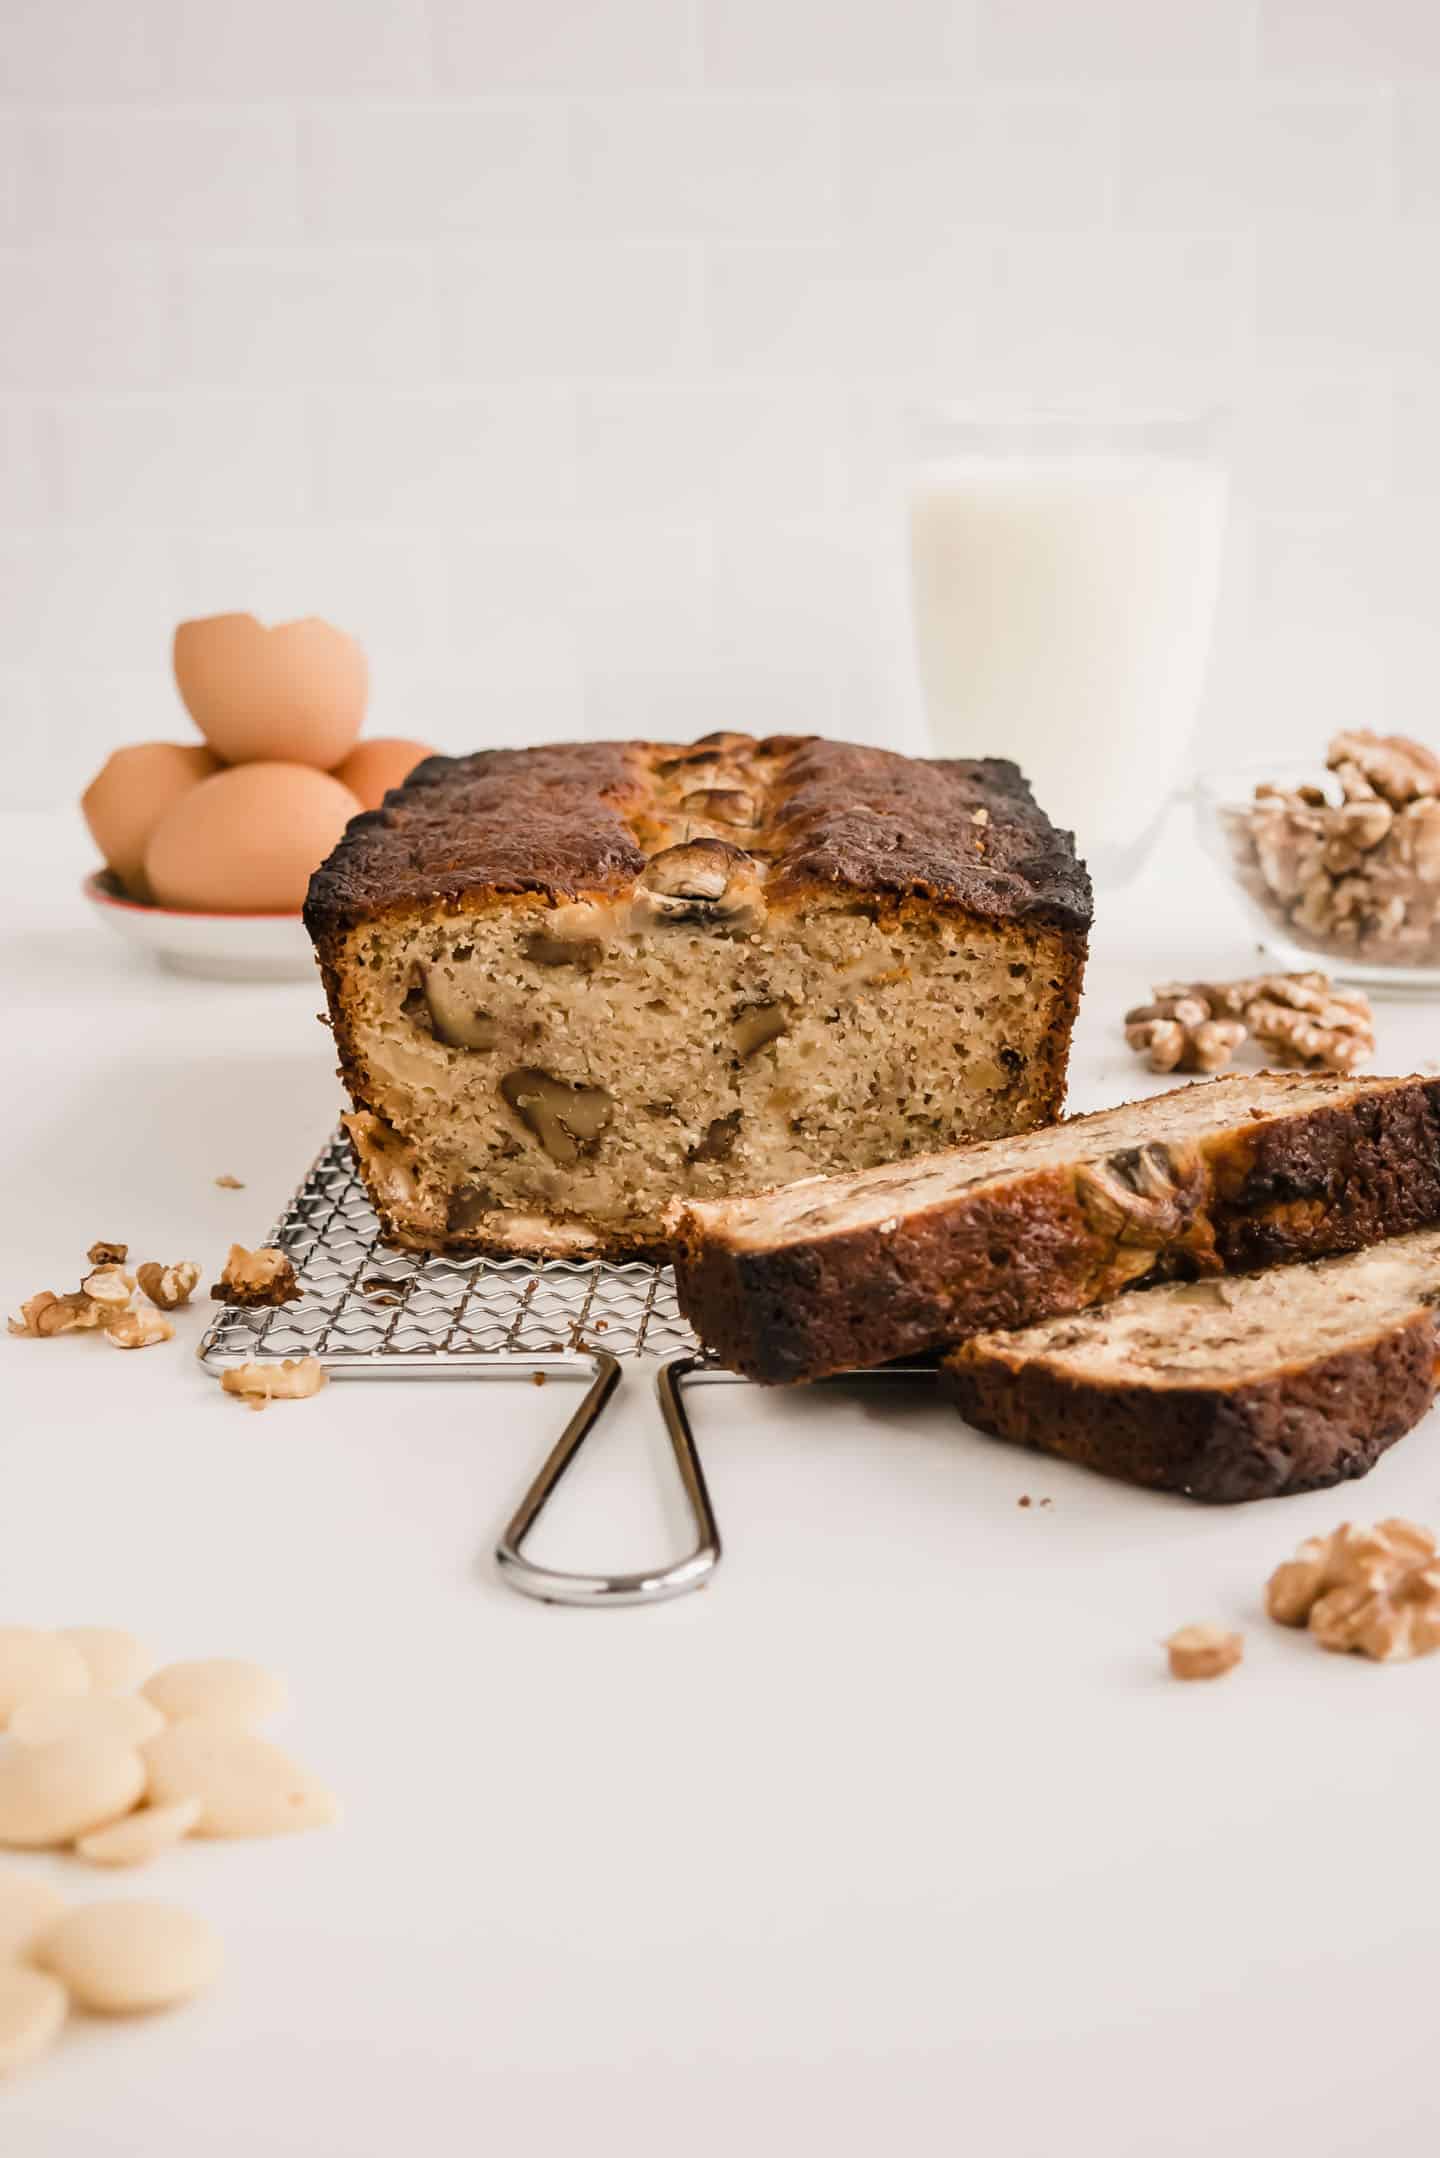 This is the traditional banana bread recipe, but enhanced with sweet white chocolate chips and crunchy walnuts. Moist, easy and quick to put together